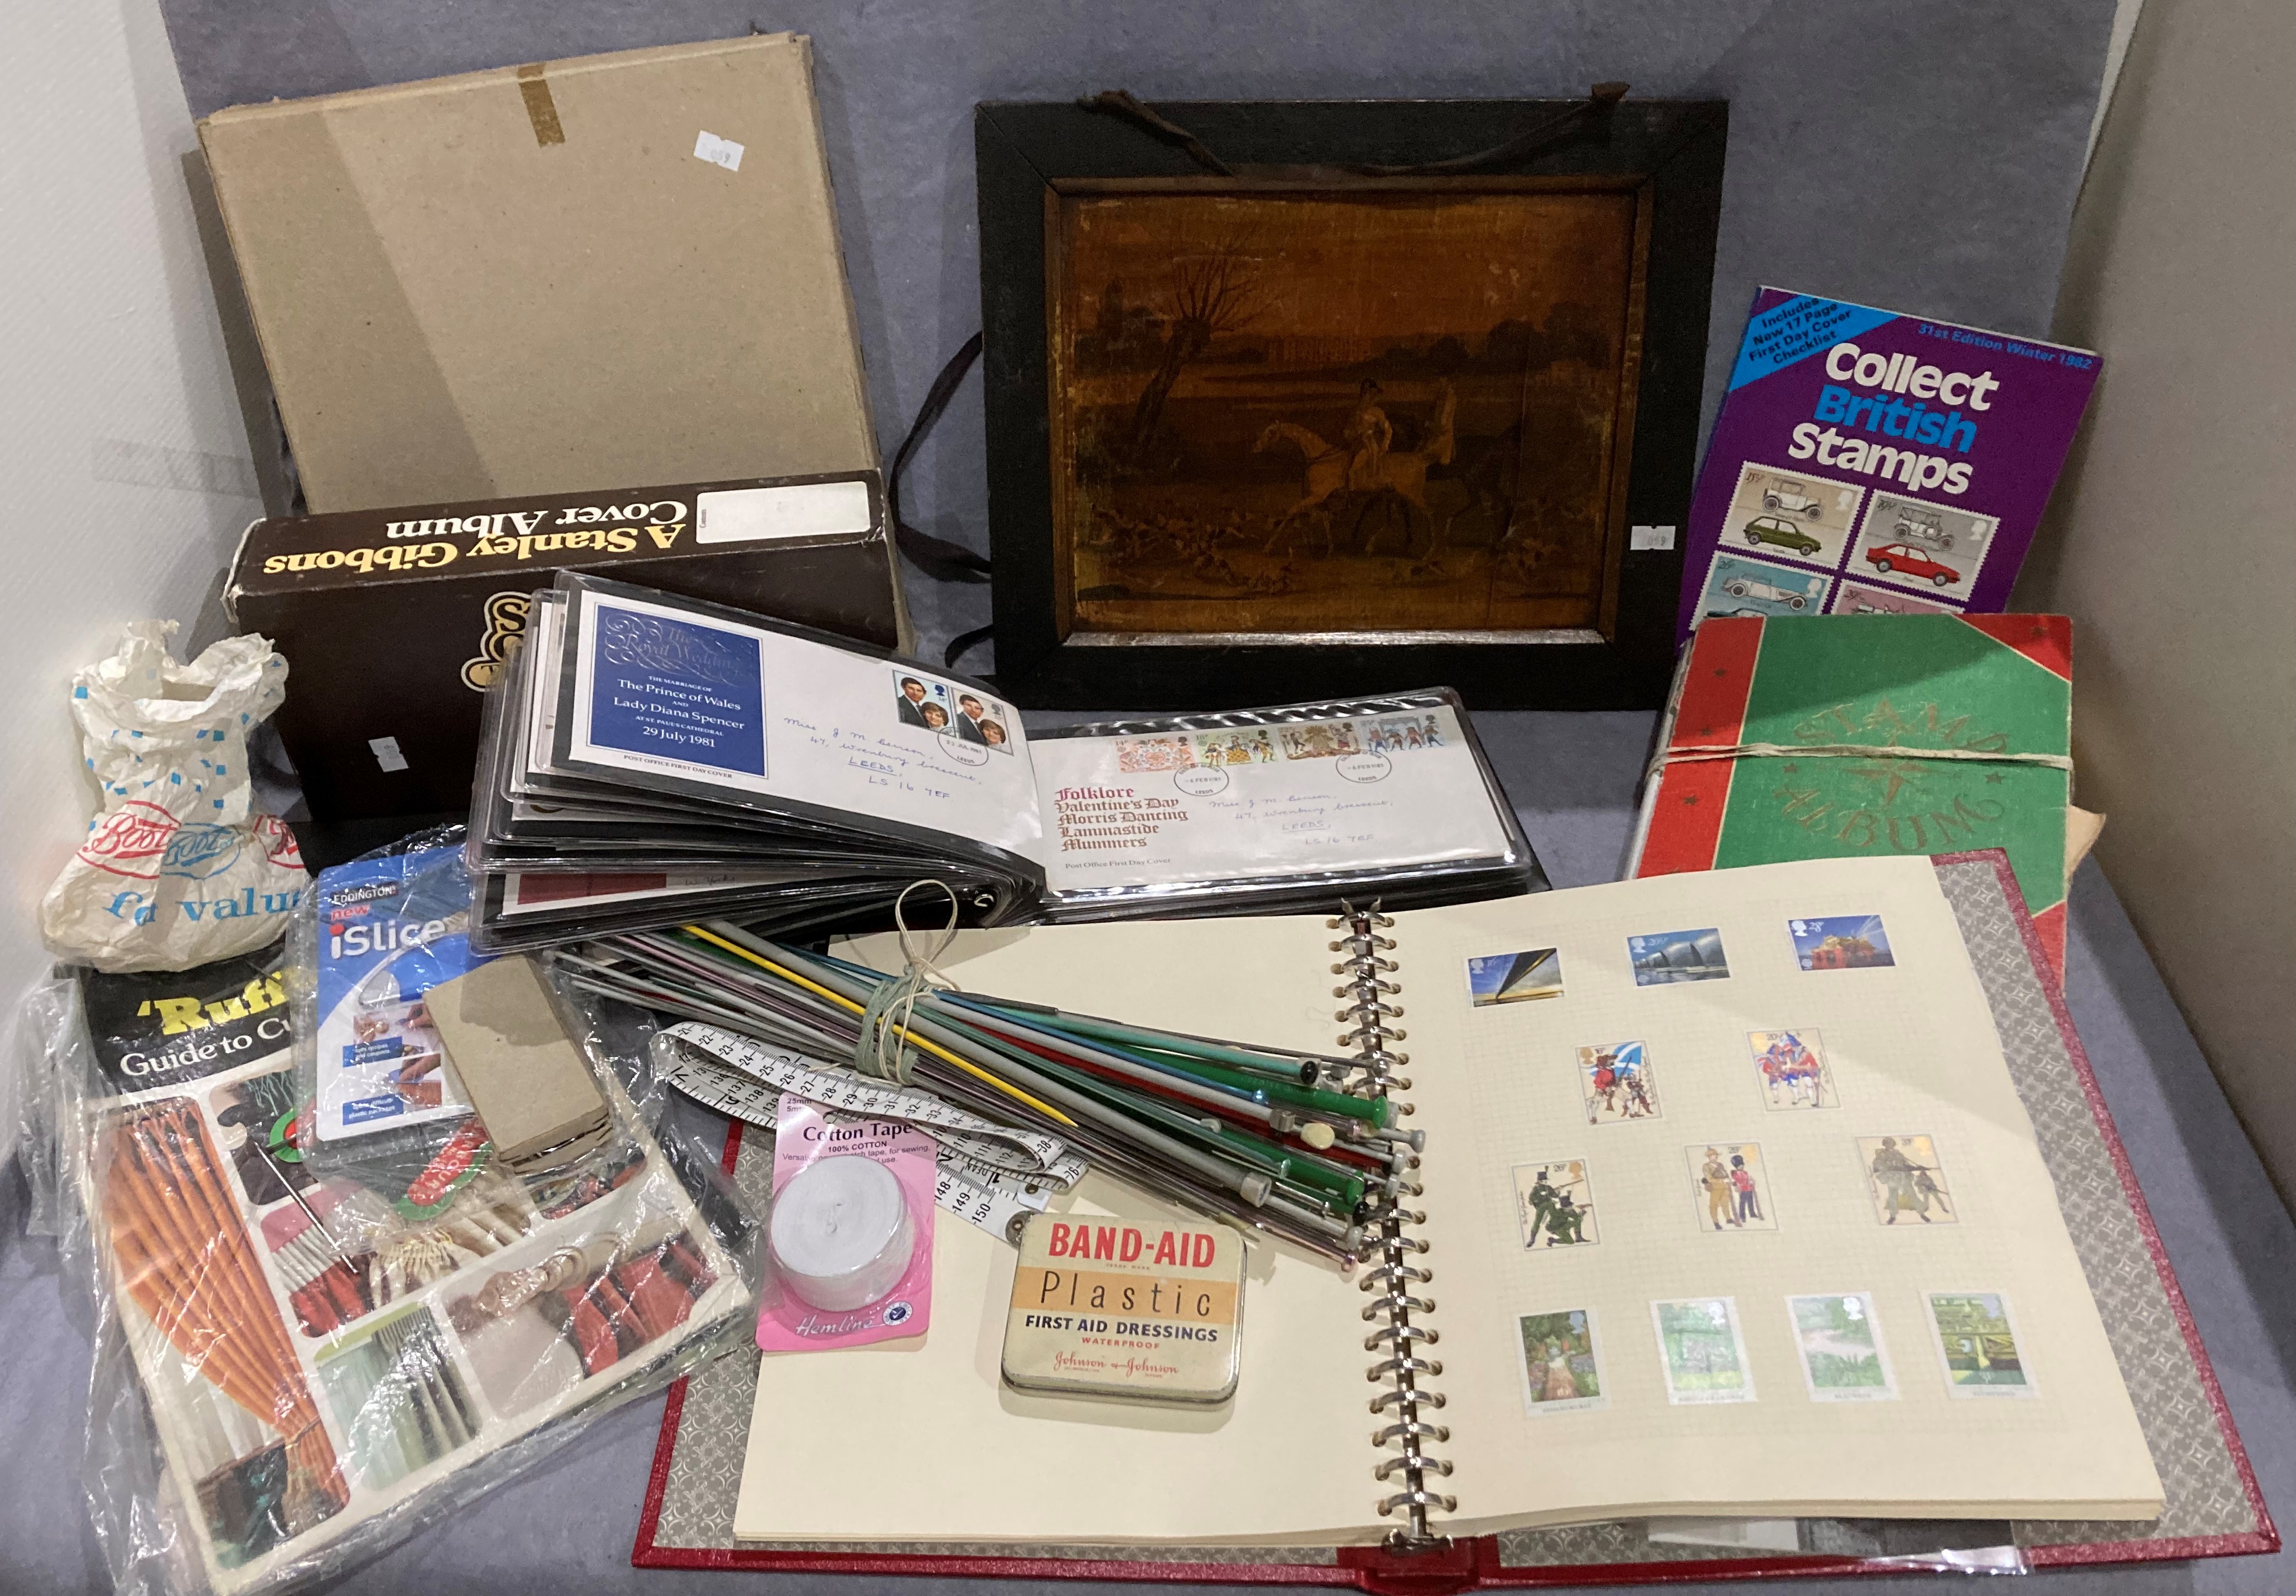 Contents to box - an Even Leaf Standard loose leaf stamp album containing British stamps circa late